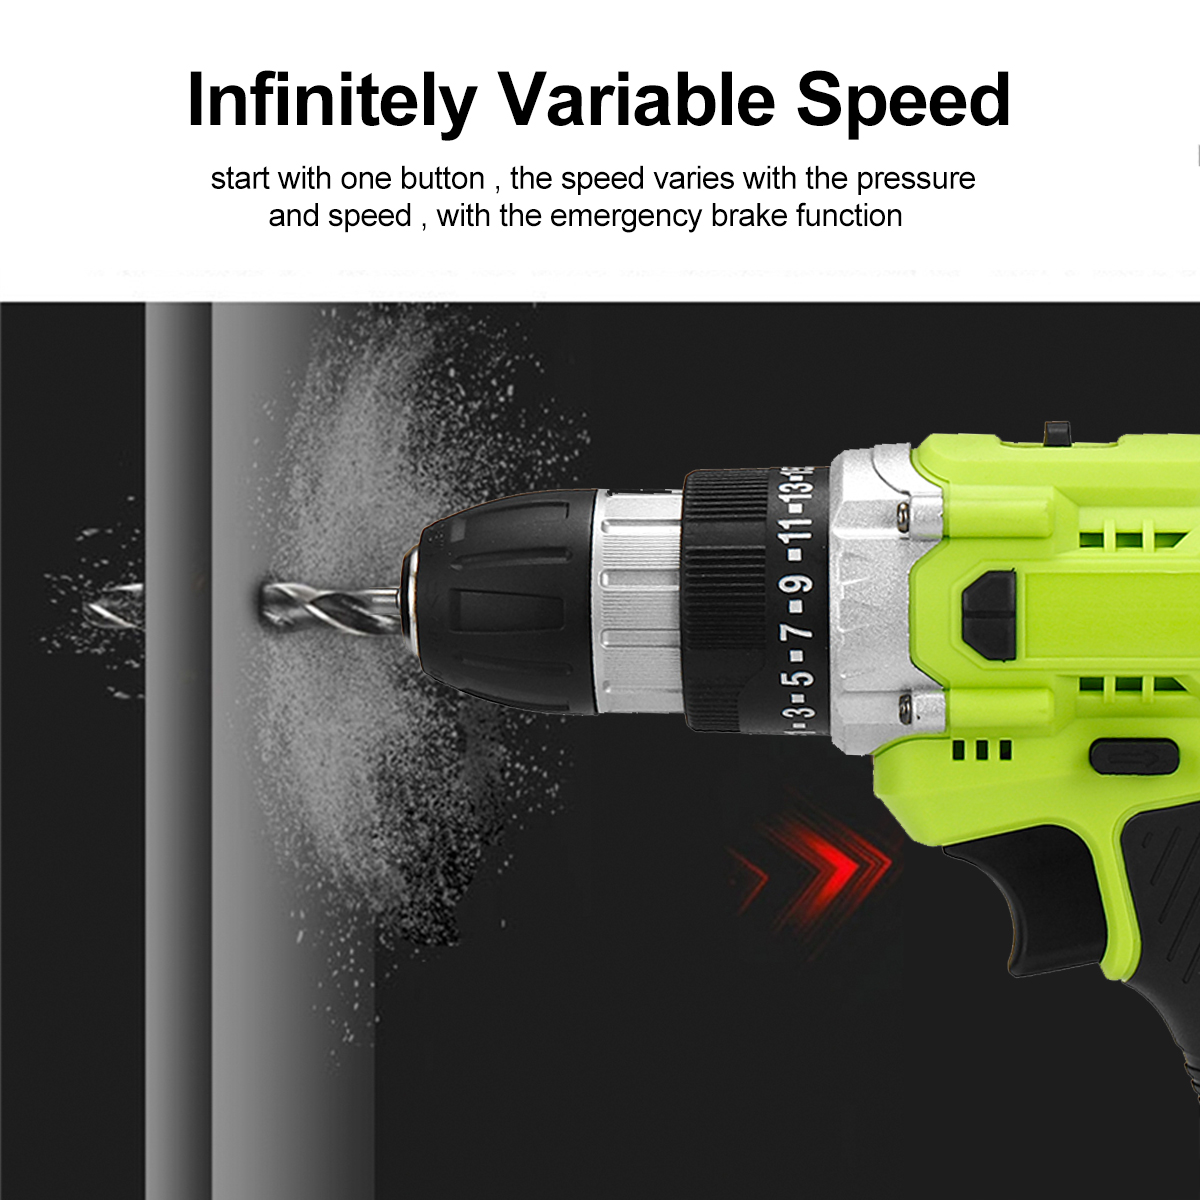 21V-Cordless-Impact-Drill-Set-3-IN-1-Electric-Torque-Wrench-Screwdriver-Drill-W-1-Or-2-Battery-Comes-1837421-10